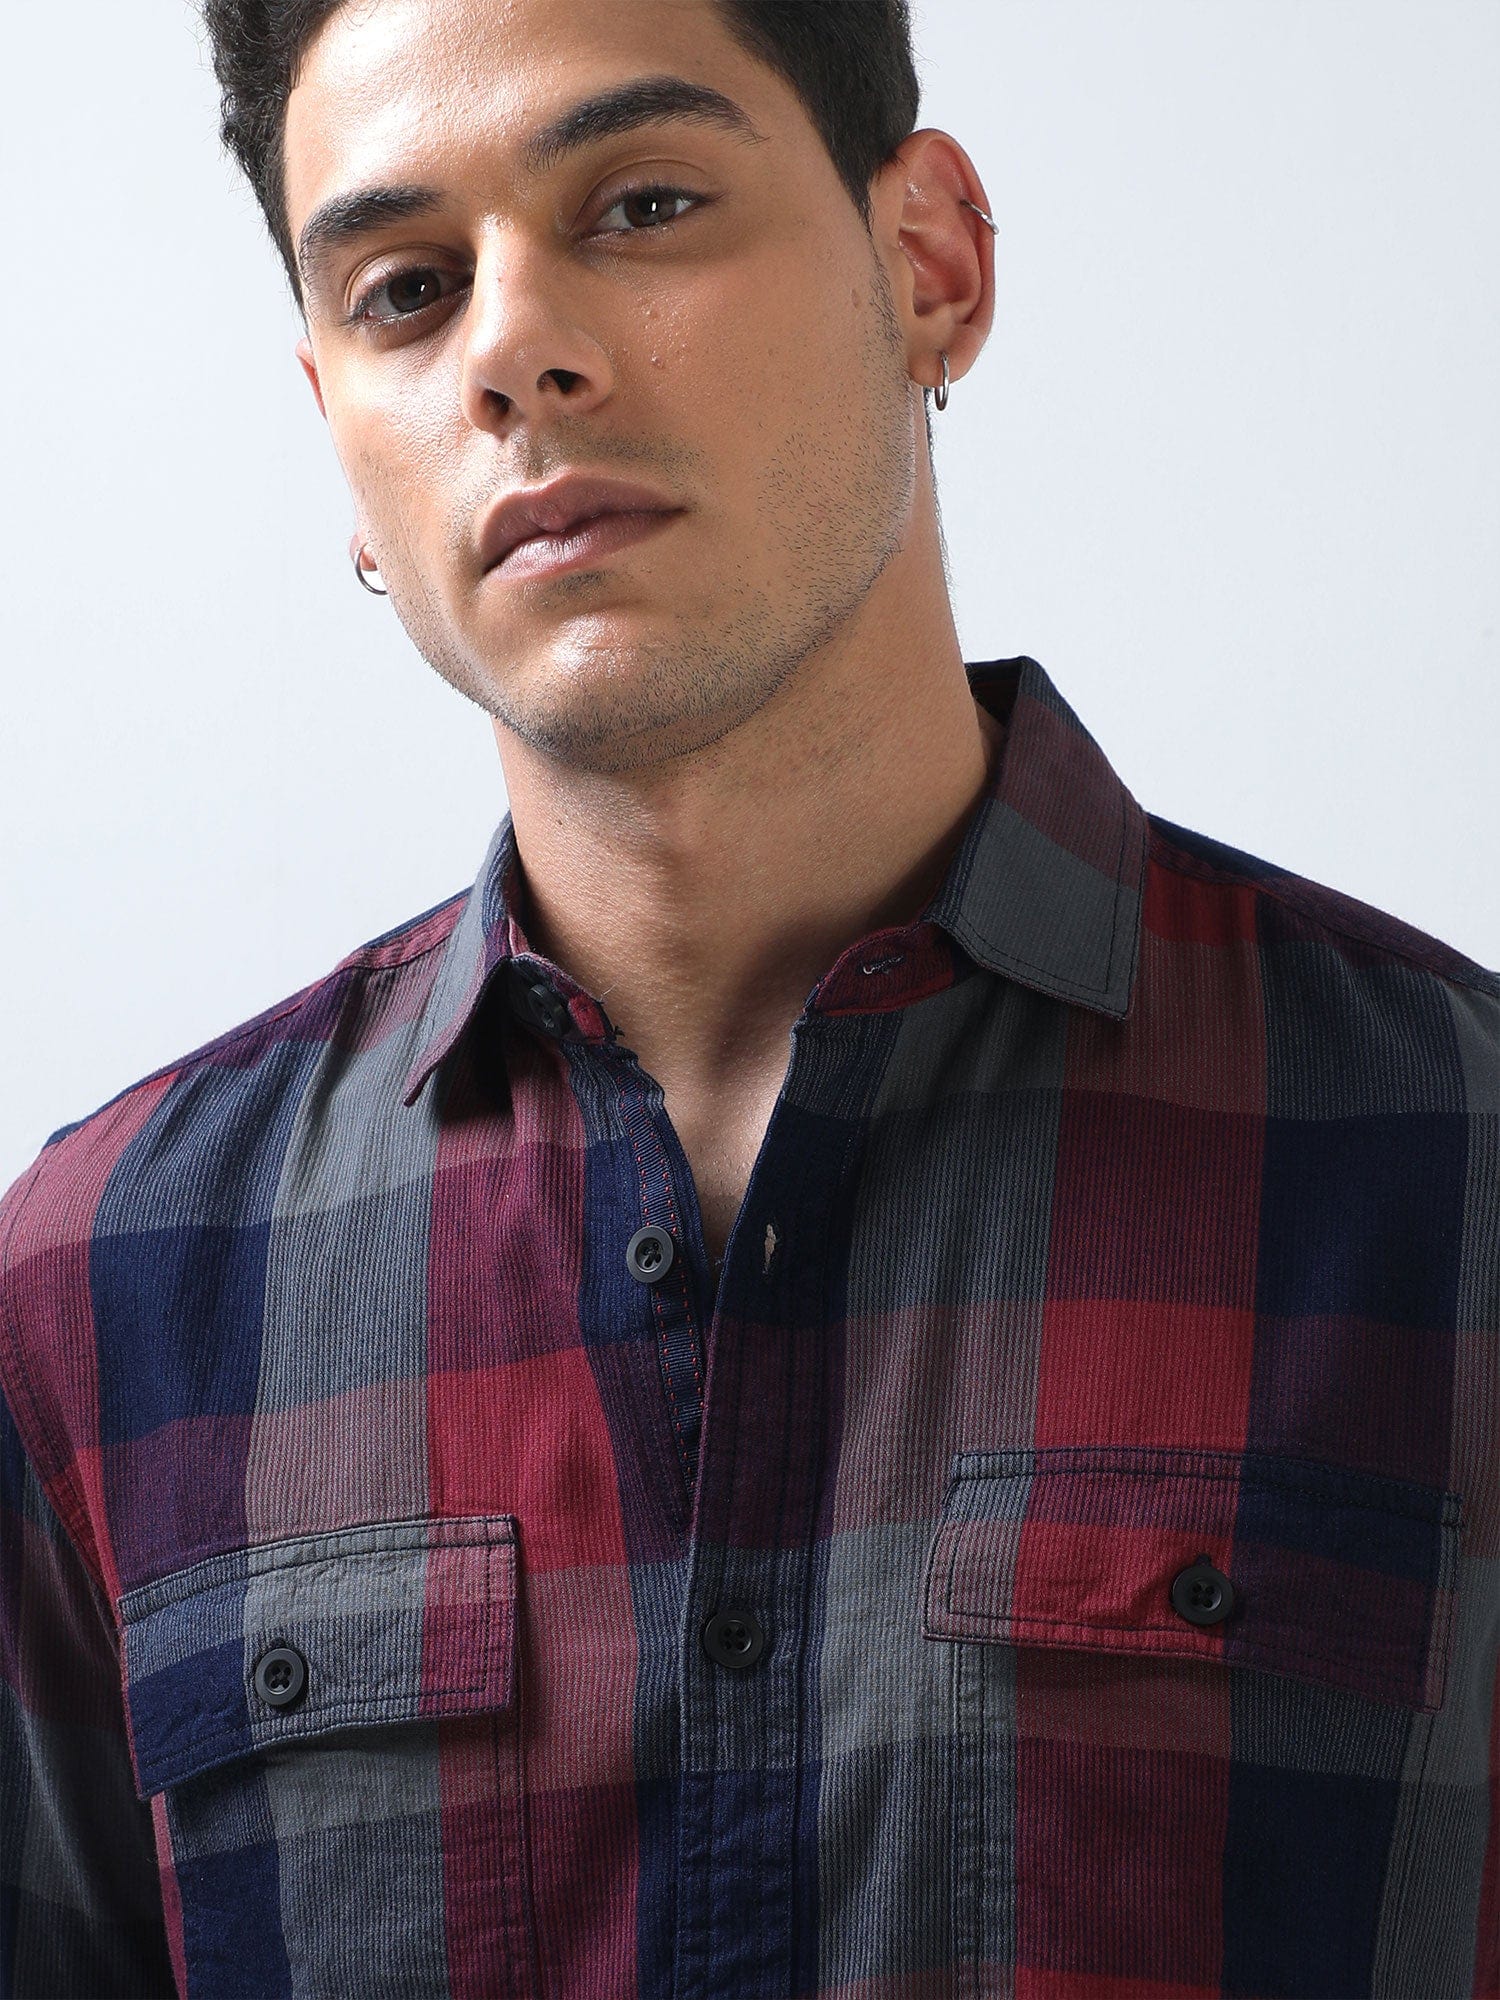 Shop Latest Red And Blue Check Shirt Online In IndiaRs. 1399.00